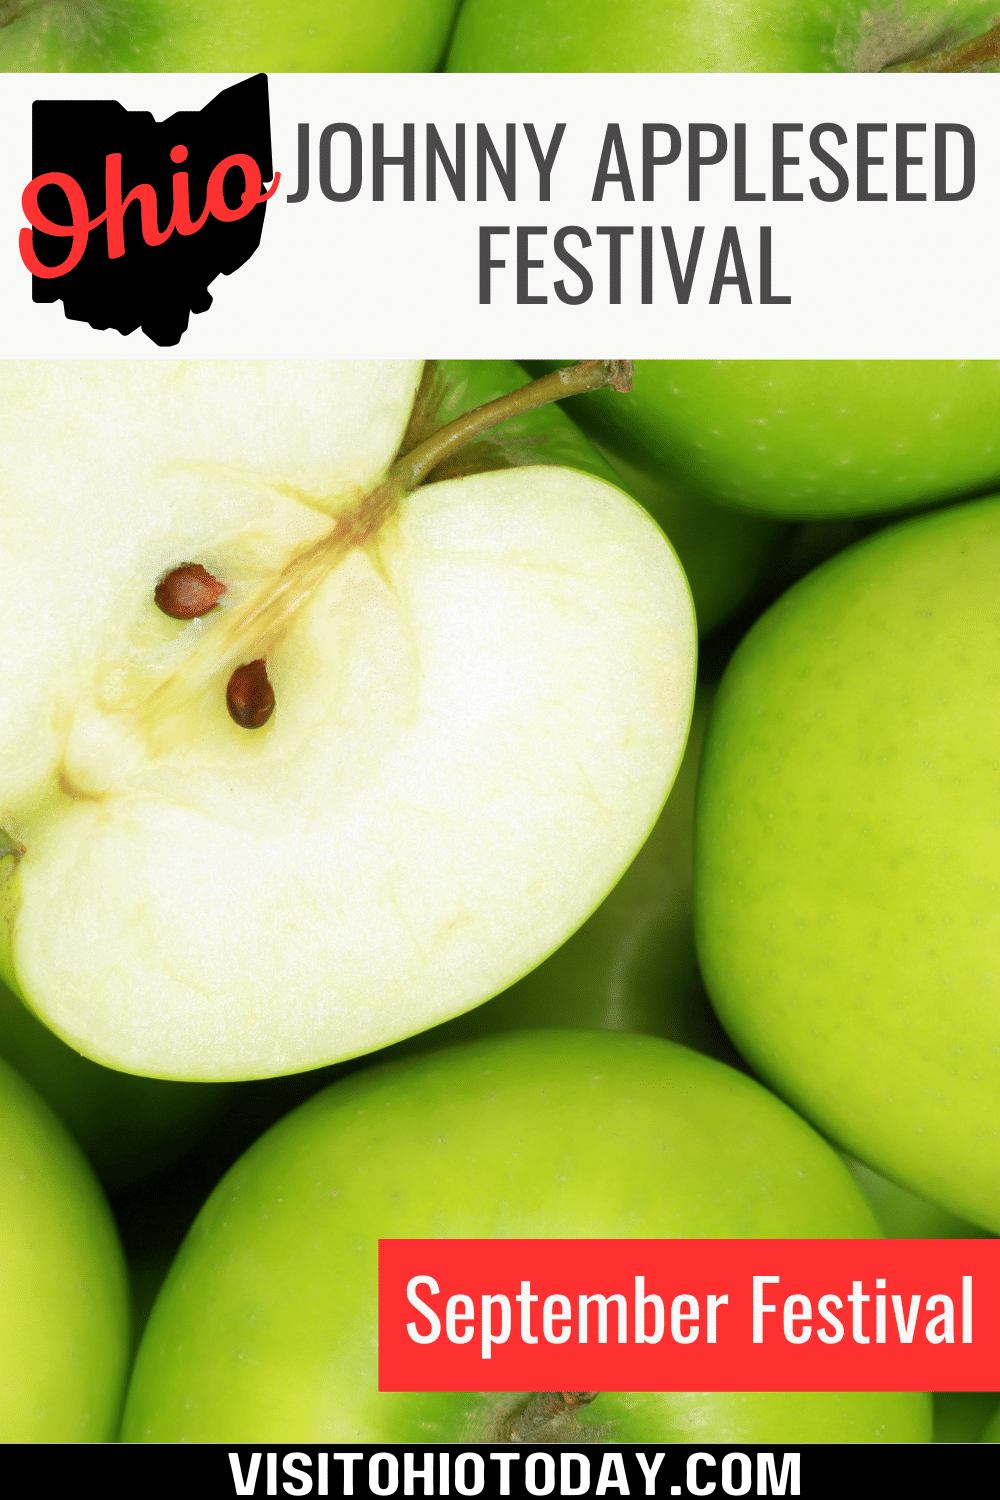 Held the third week of September – 16th and 17th in Lisbon, this festival celebrates the strange life of Johnny Appleseed. It is possible that without him Ohio would not be the apple-growing state it is!